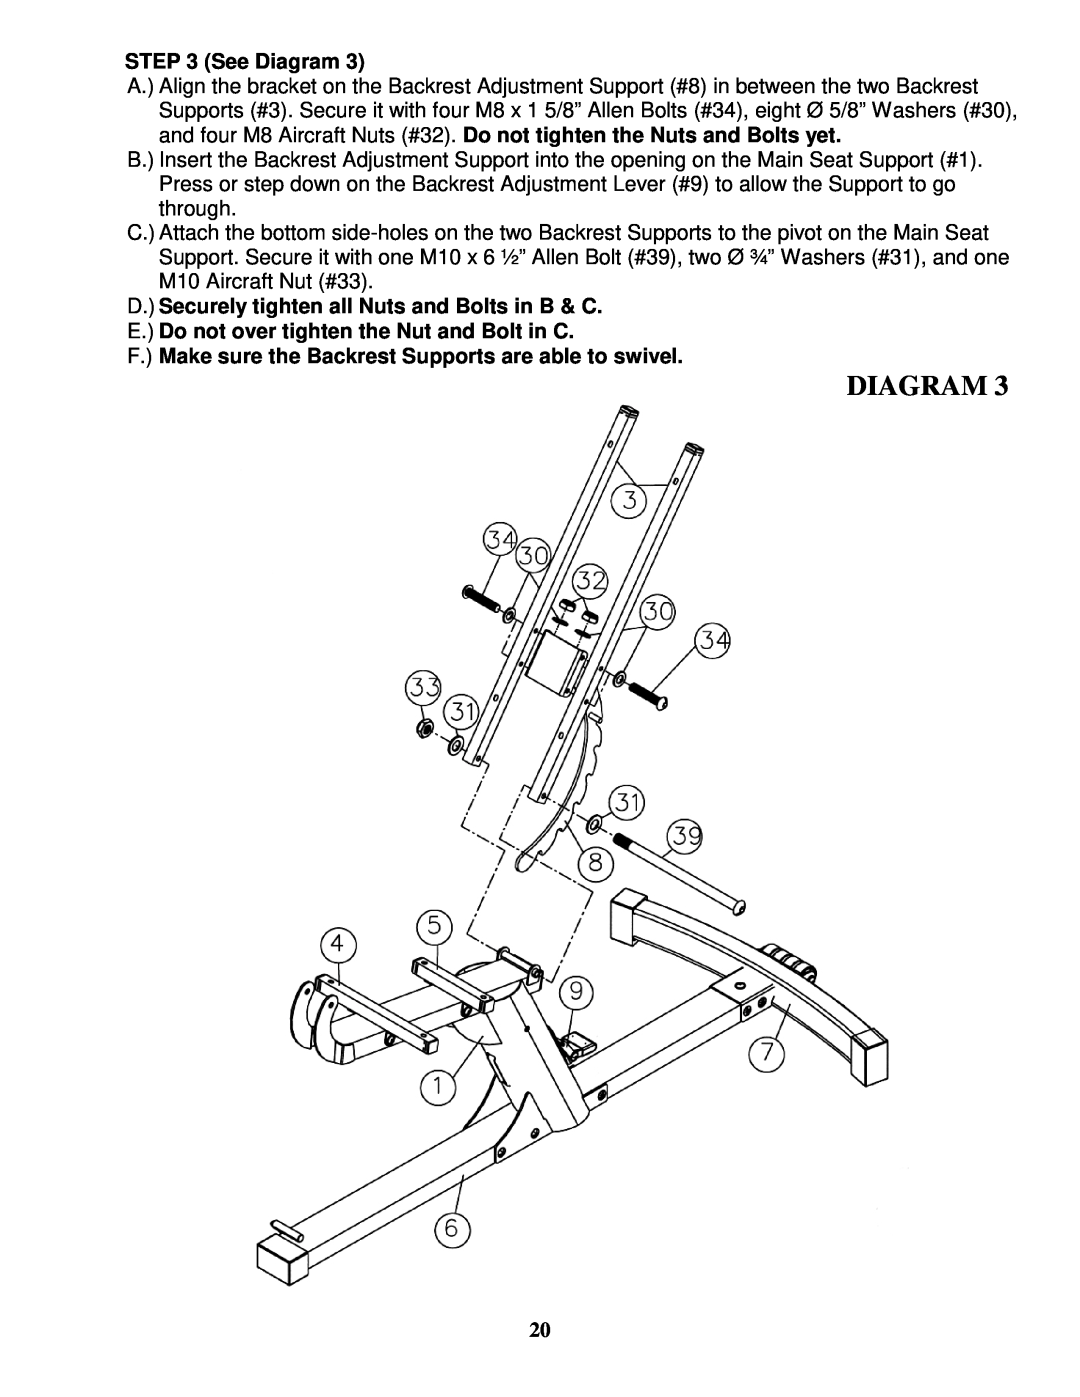 Impex MD-8850 manual See Diagram, D. Securely tighten all Nuts and Bolts in B & C 